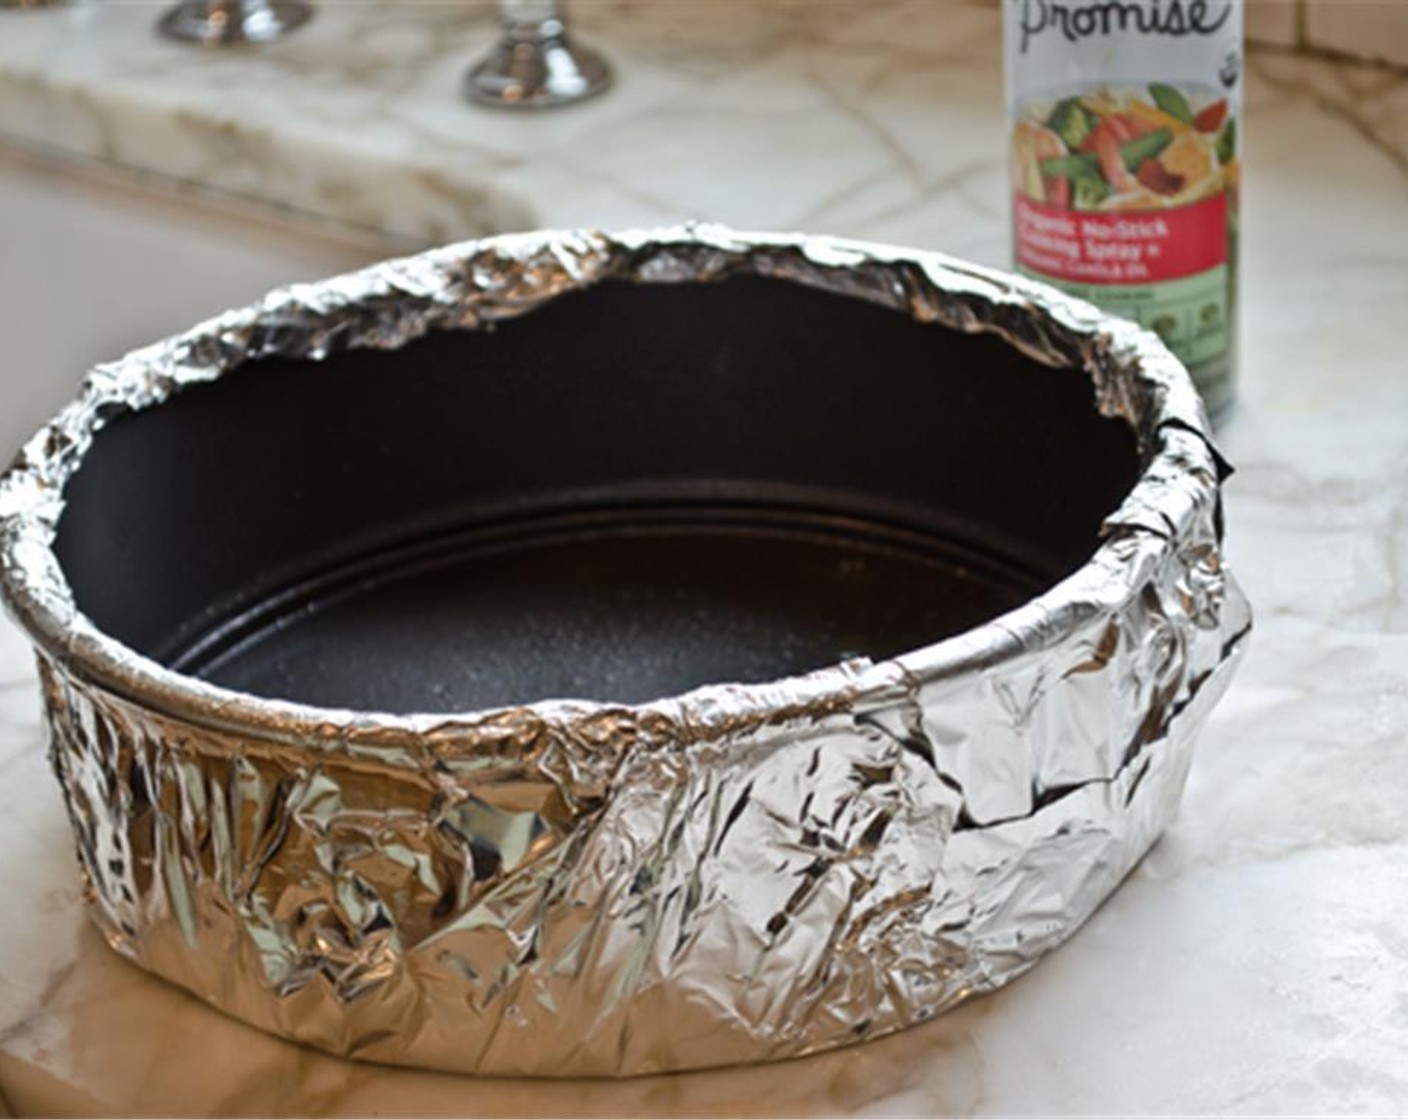 step 1 For the crust: preheat the oven to 325 degrees F (160 degrees C). Wrap a 9-inch springform pan with aluminum foil. Spray the bottom and sides of the pan with Nonstick Cooking Spray (as needed).